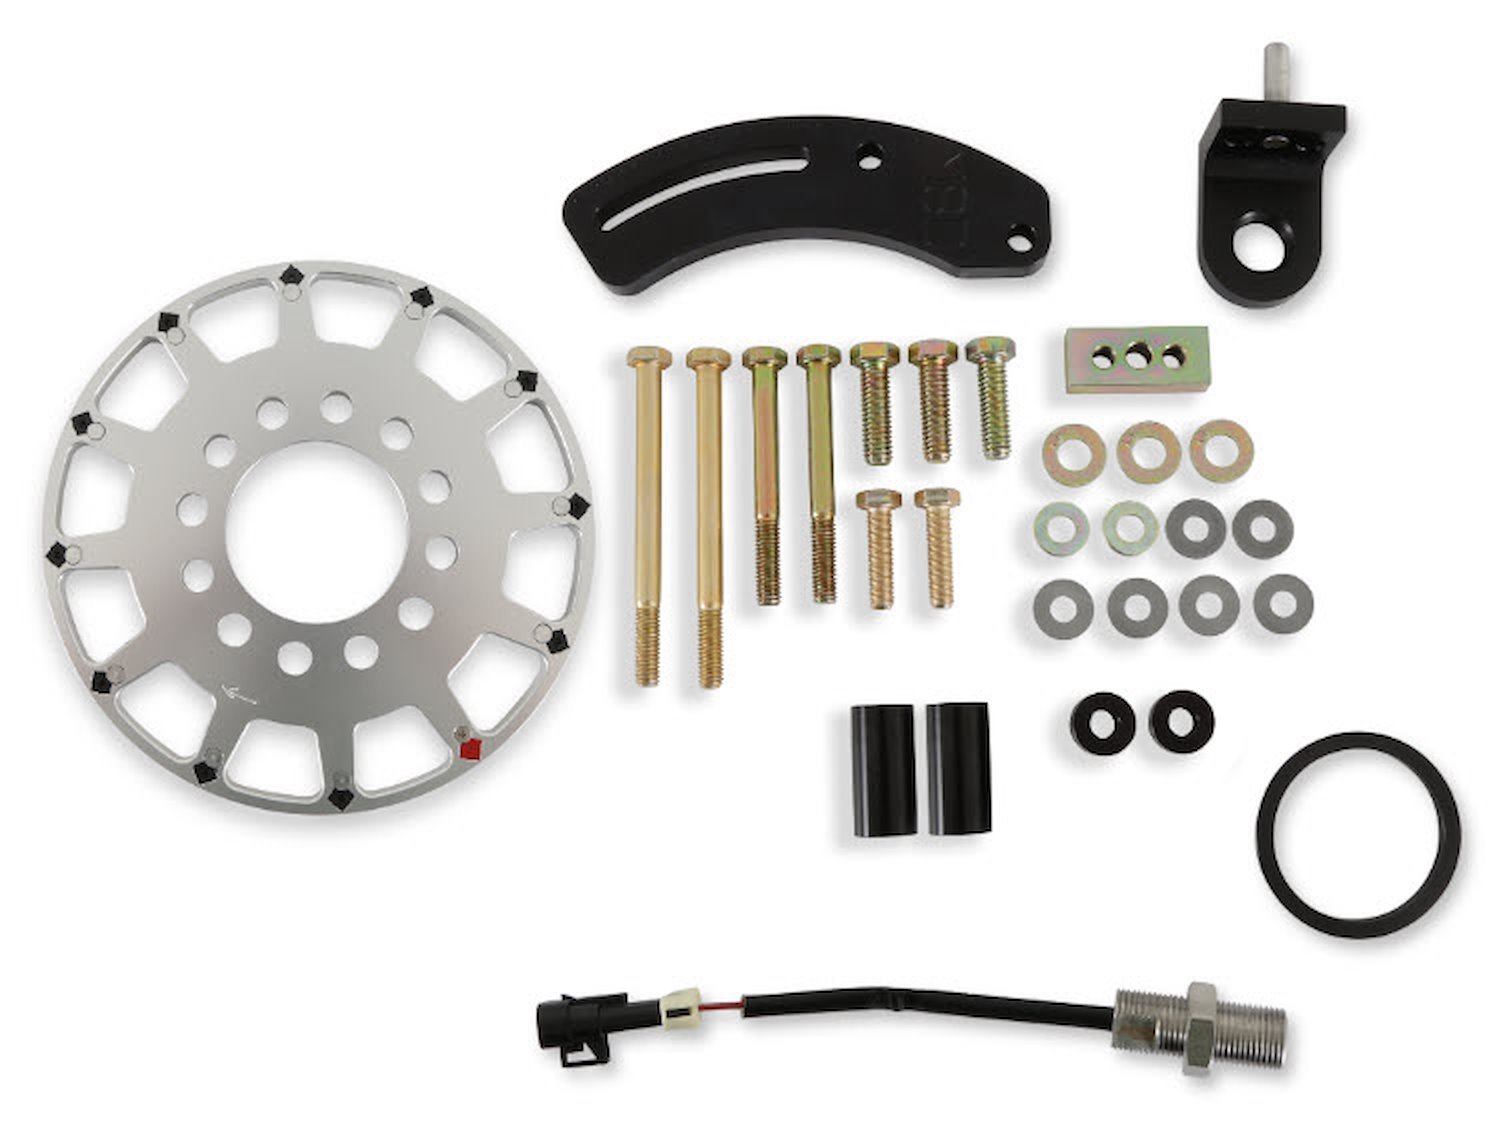 EFI Crank Trigger System for Ford Small Block Engines (6.560 in.)